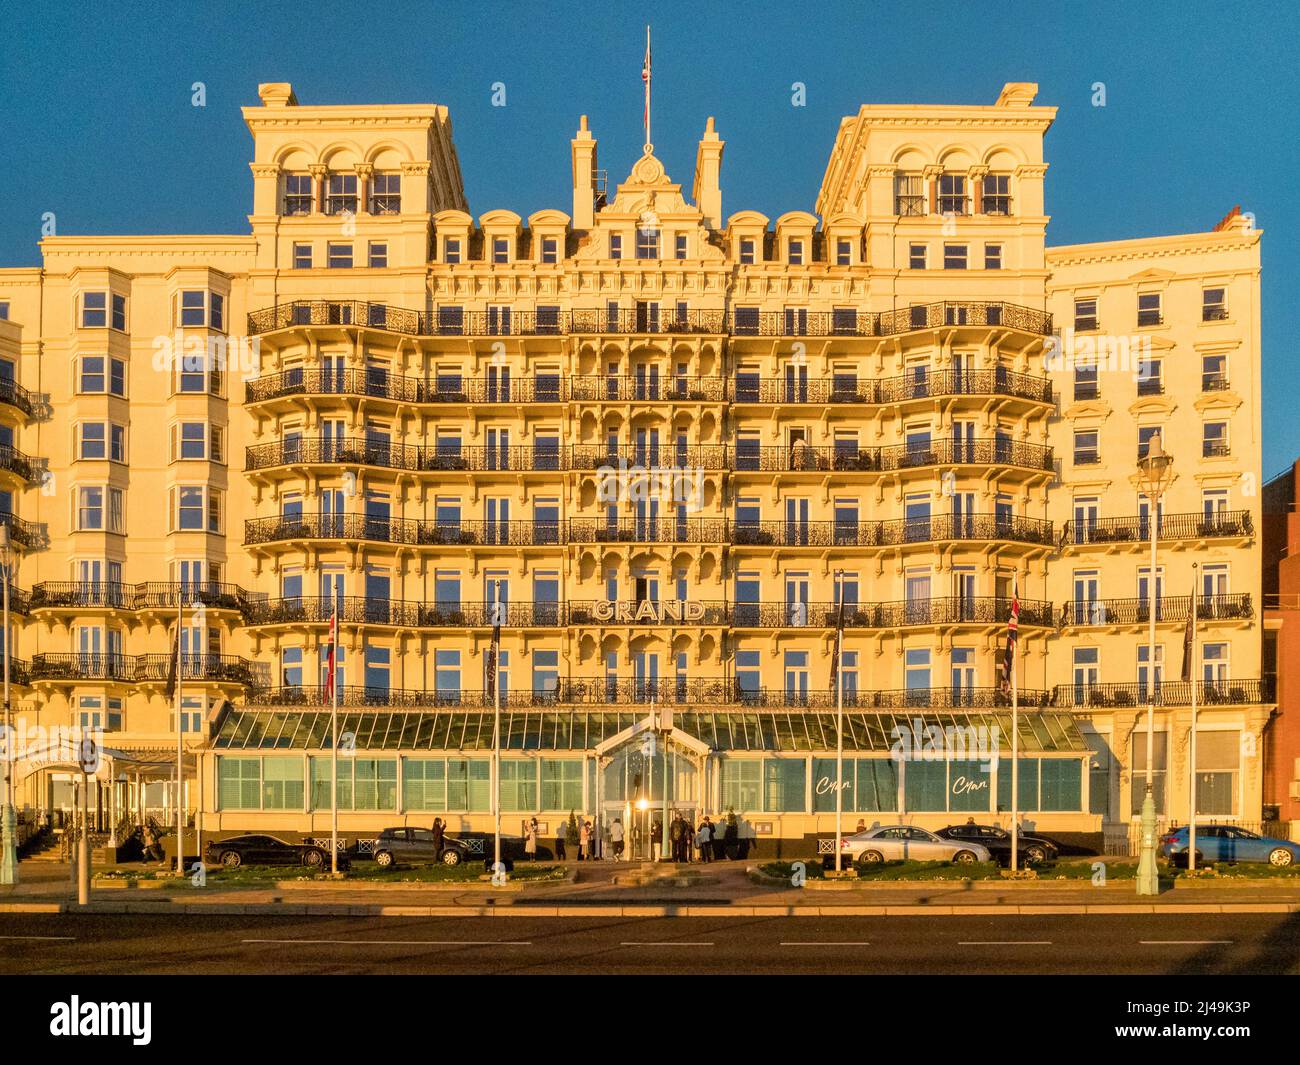 13 January 2022: Brighton, East Sussex, UK - The Grand Hotel, Brighton, sunlit on a clear winter afternoon. Stock Photo